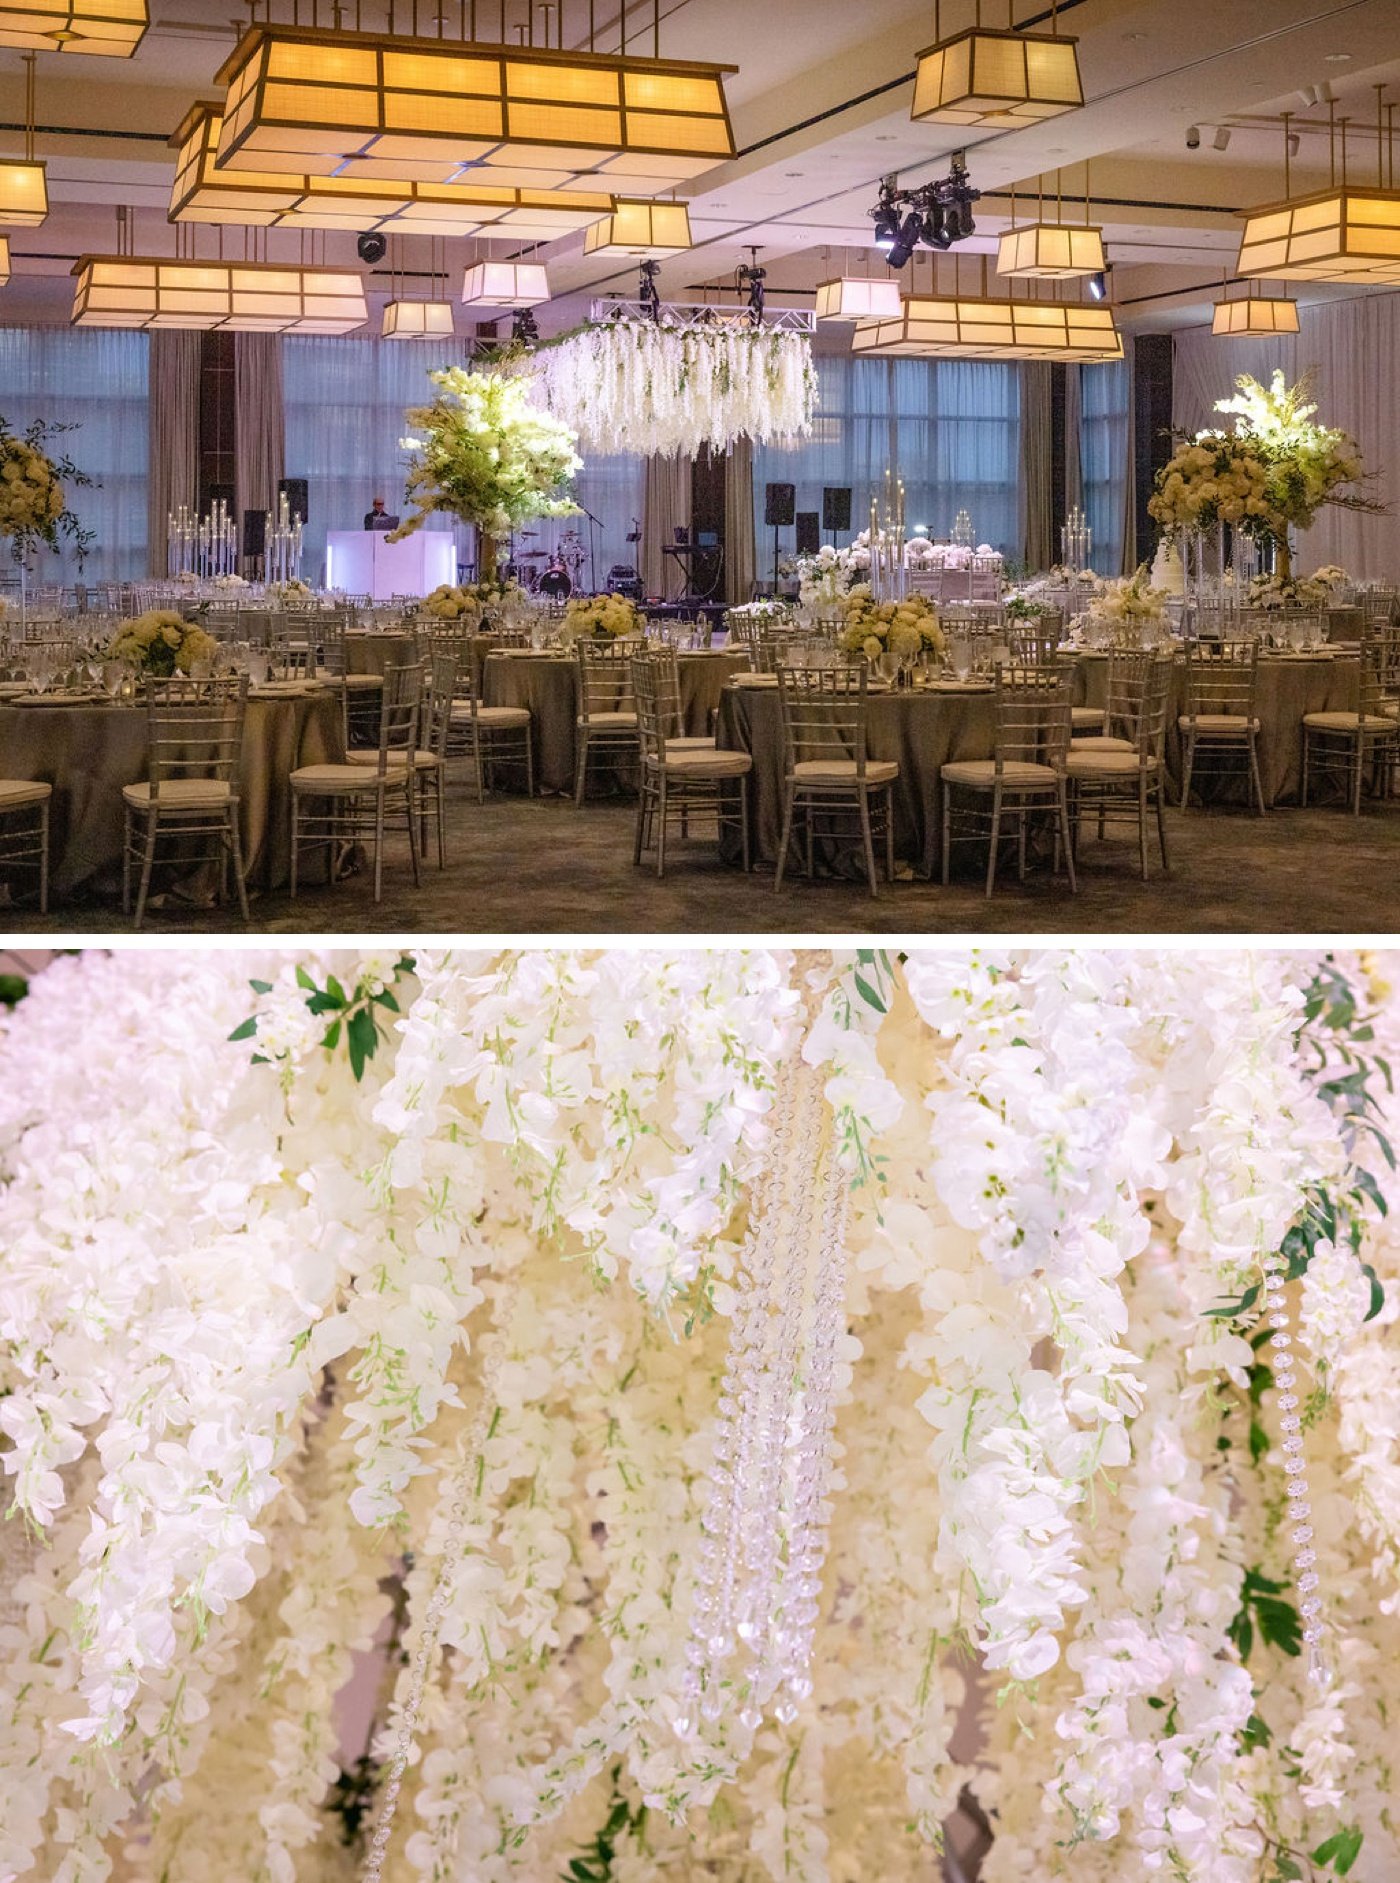 White wisteria flowers hanging above a wedding reception dance floor